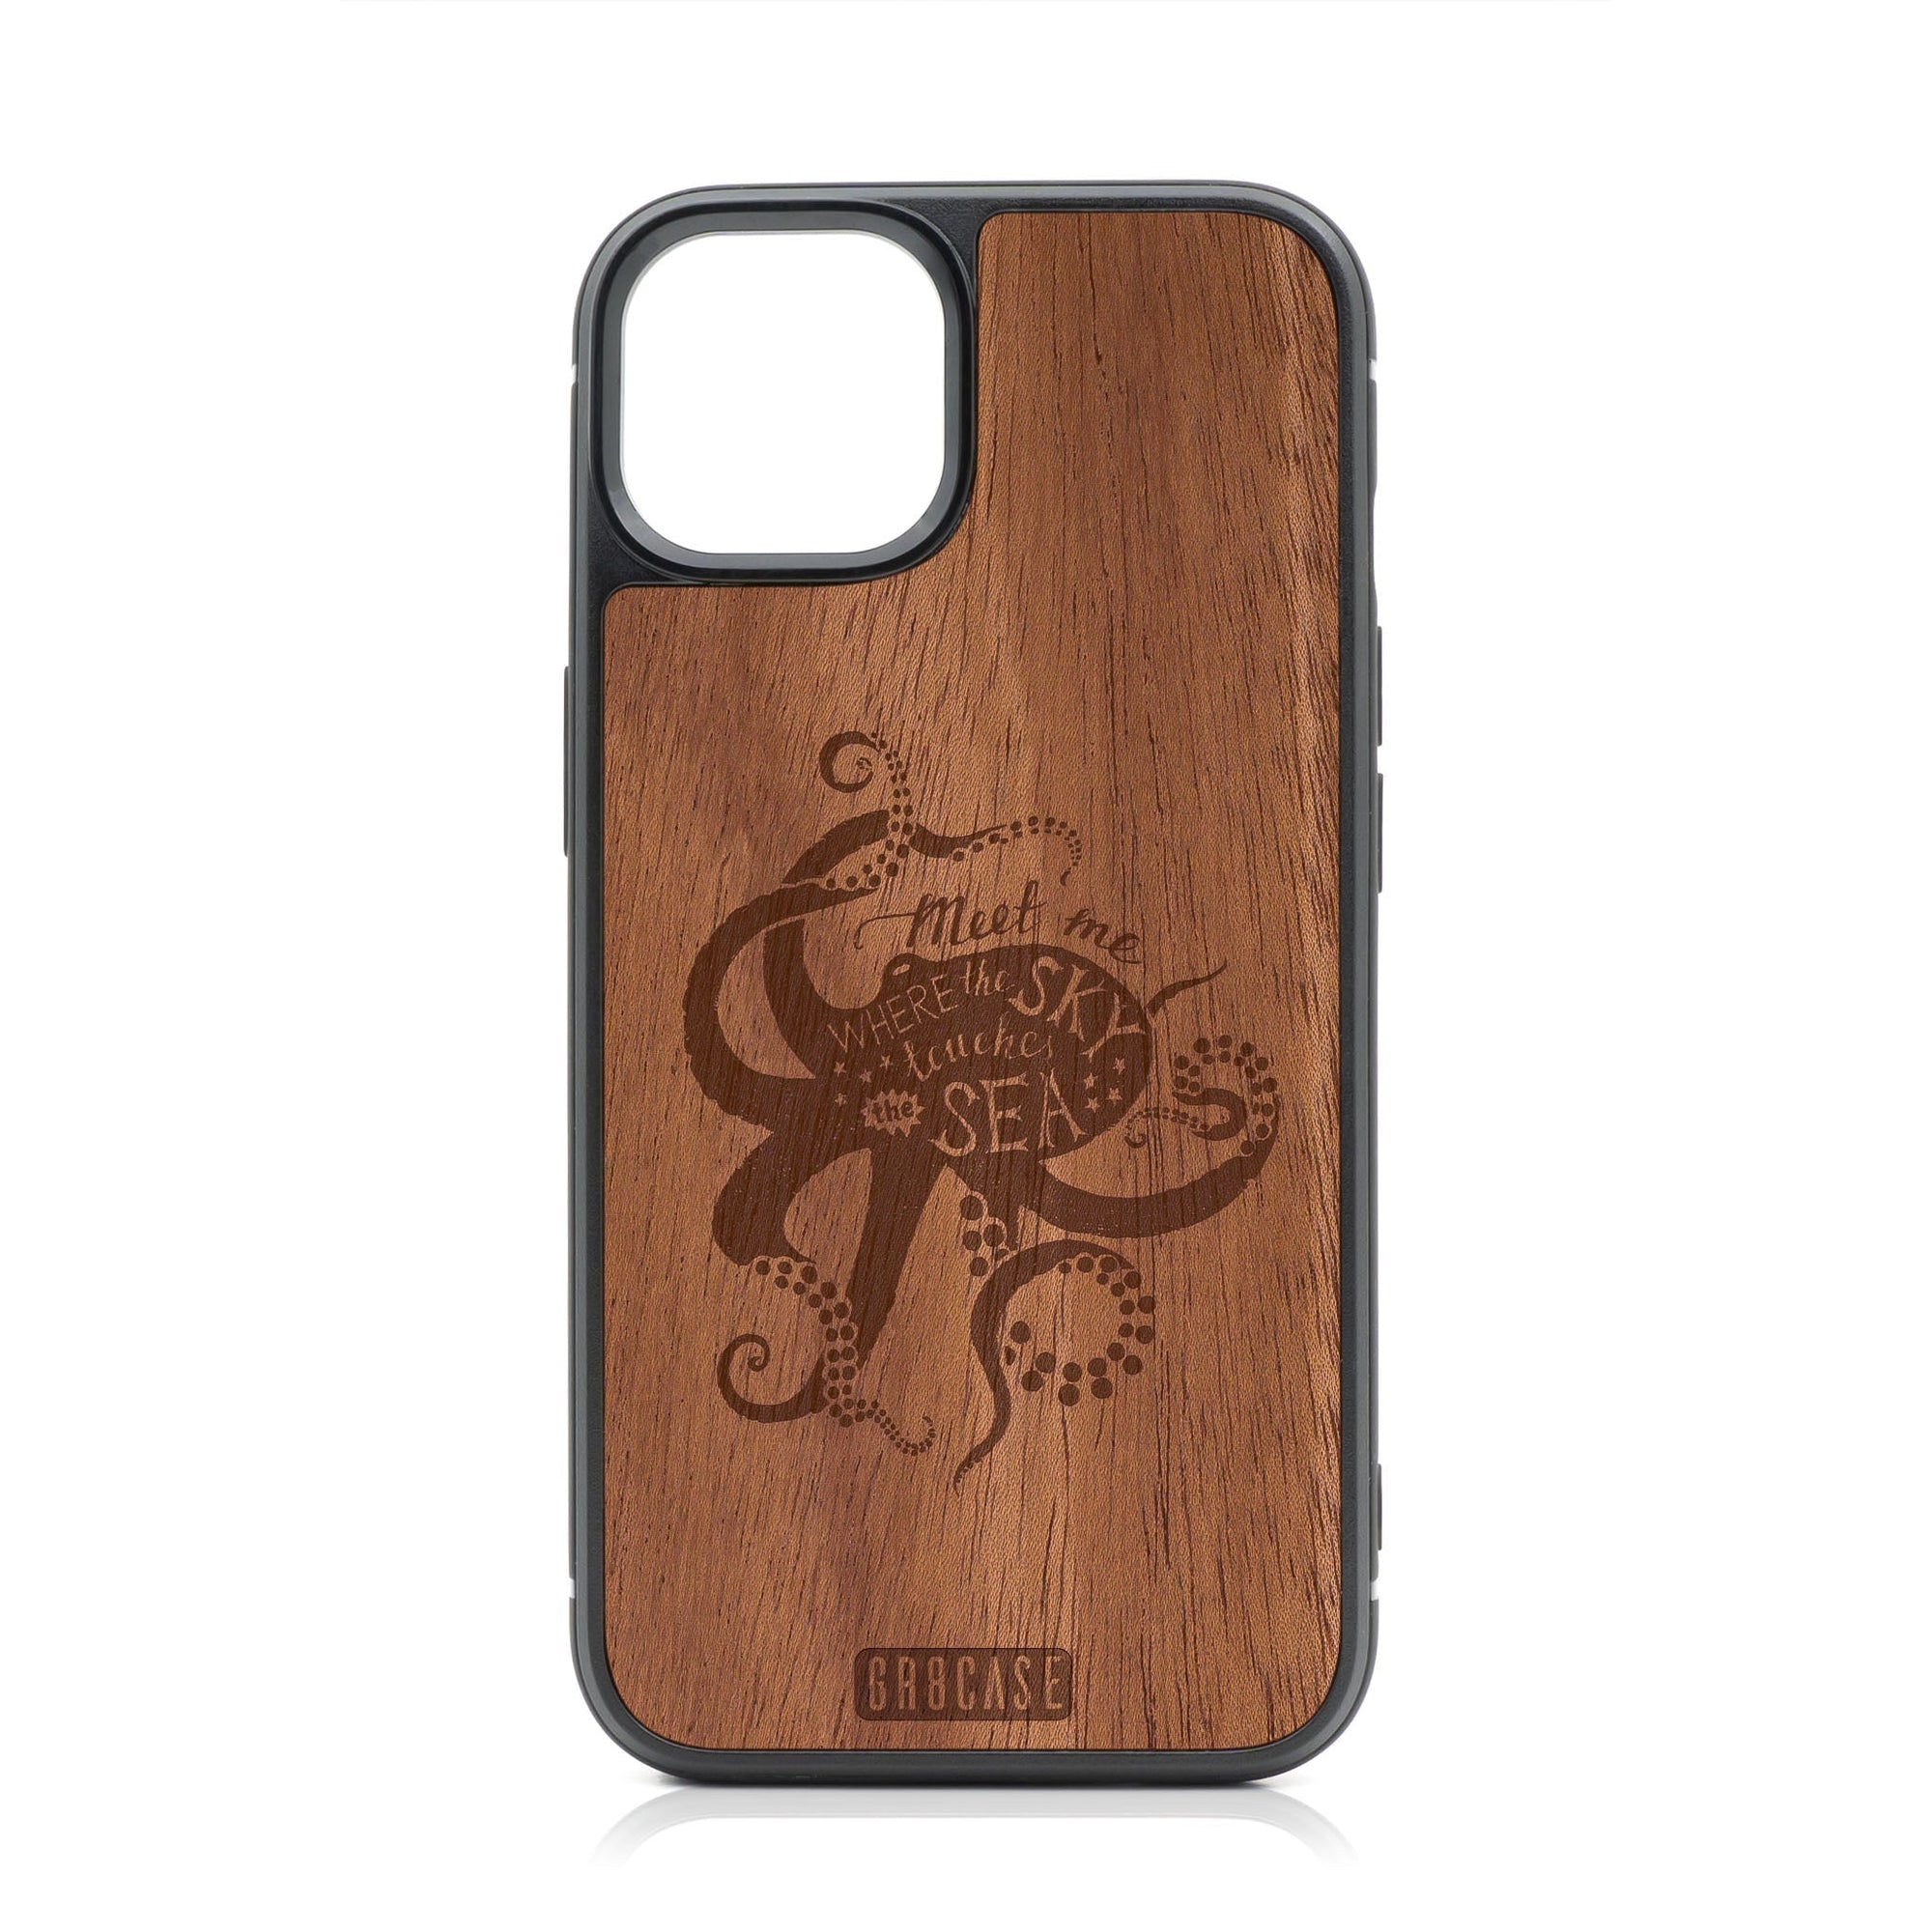 Meet Me Where The Sky Touches The Sea (Octopus) Design Wood Case For iPhone 15